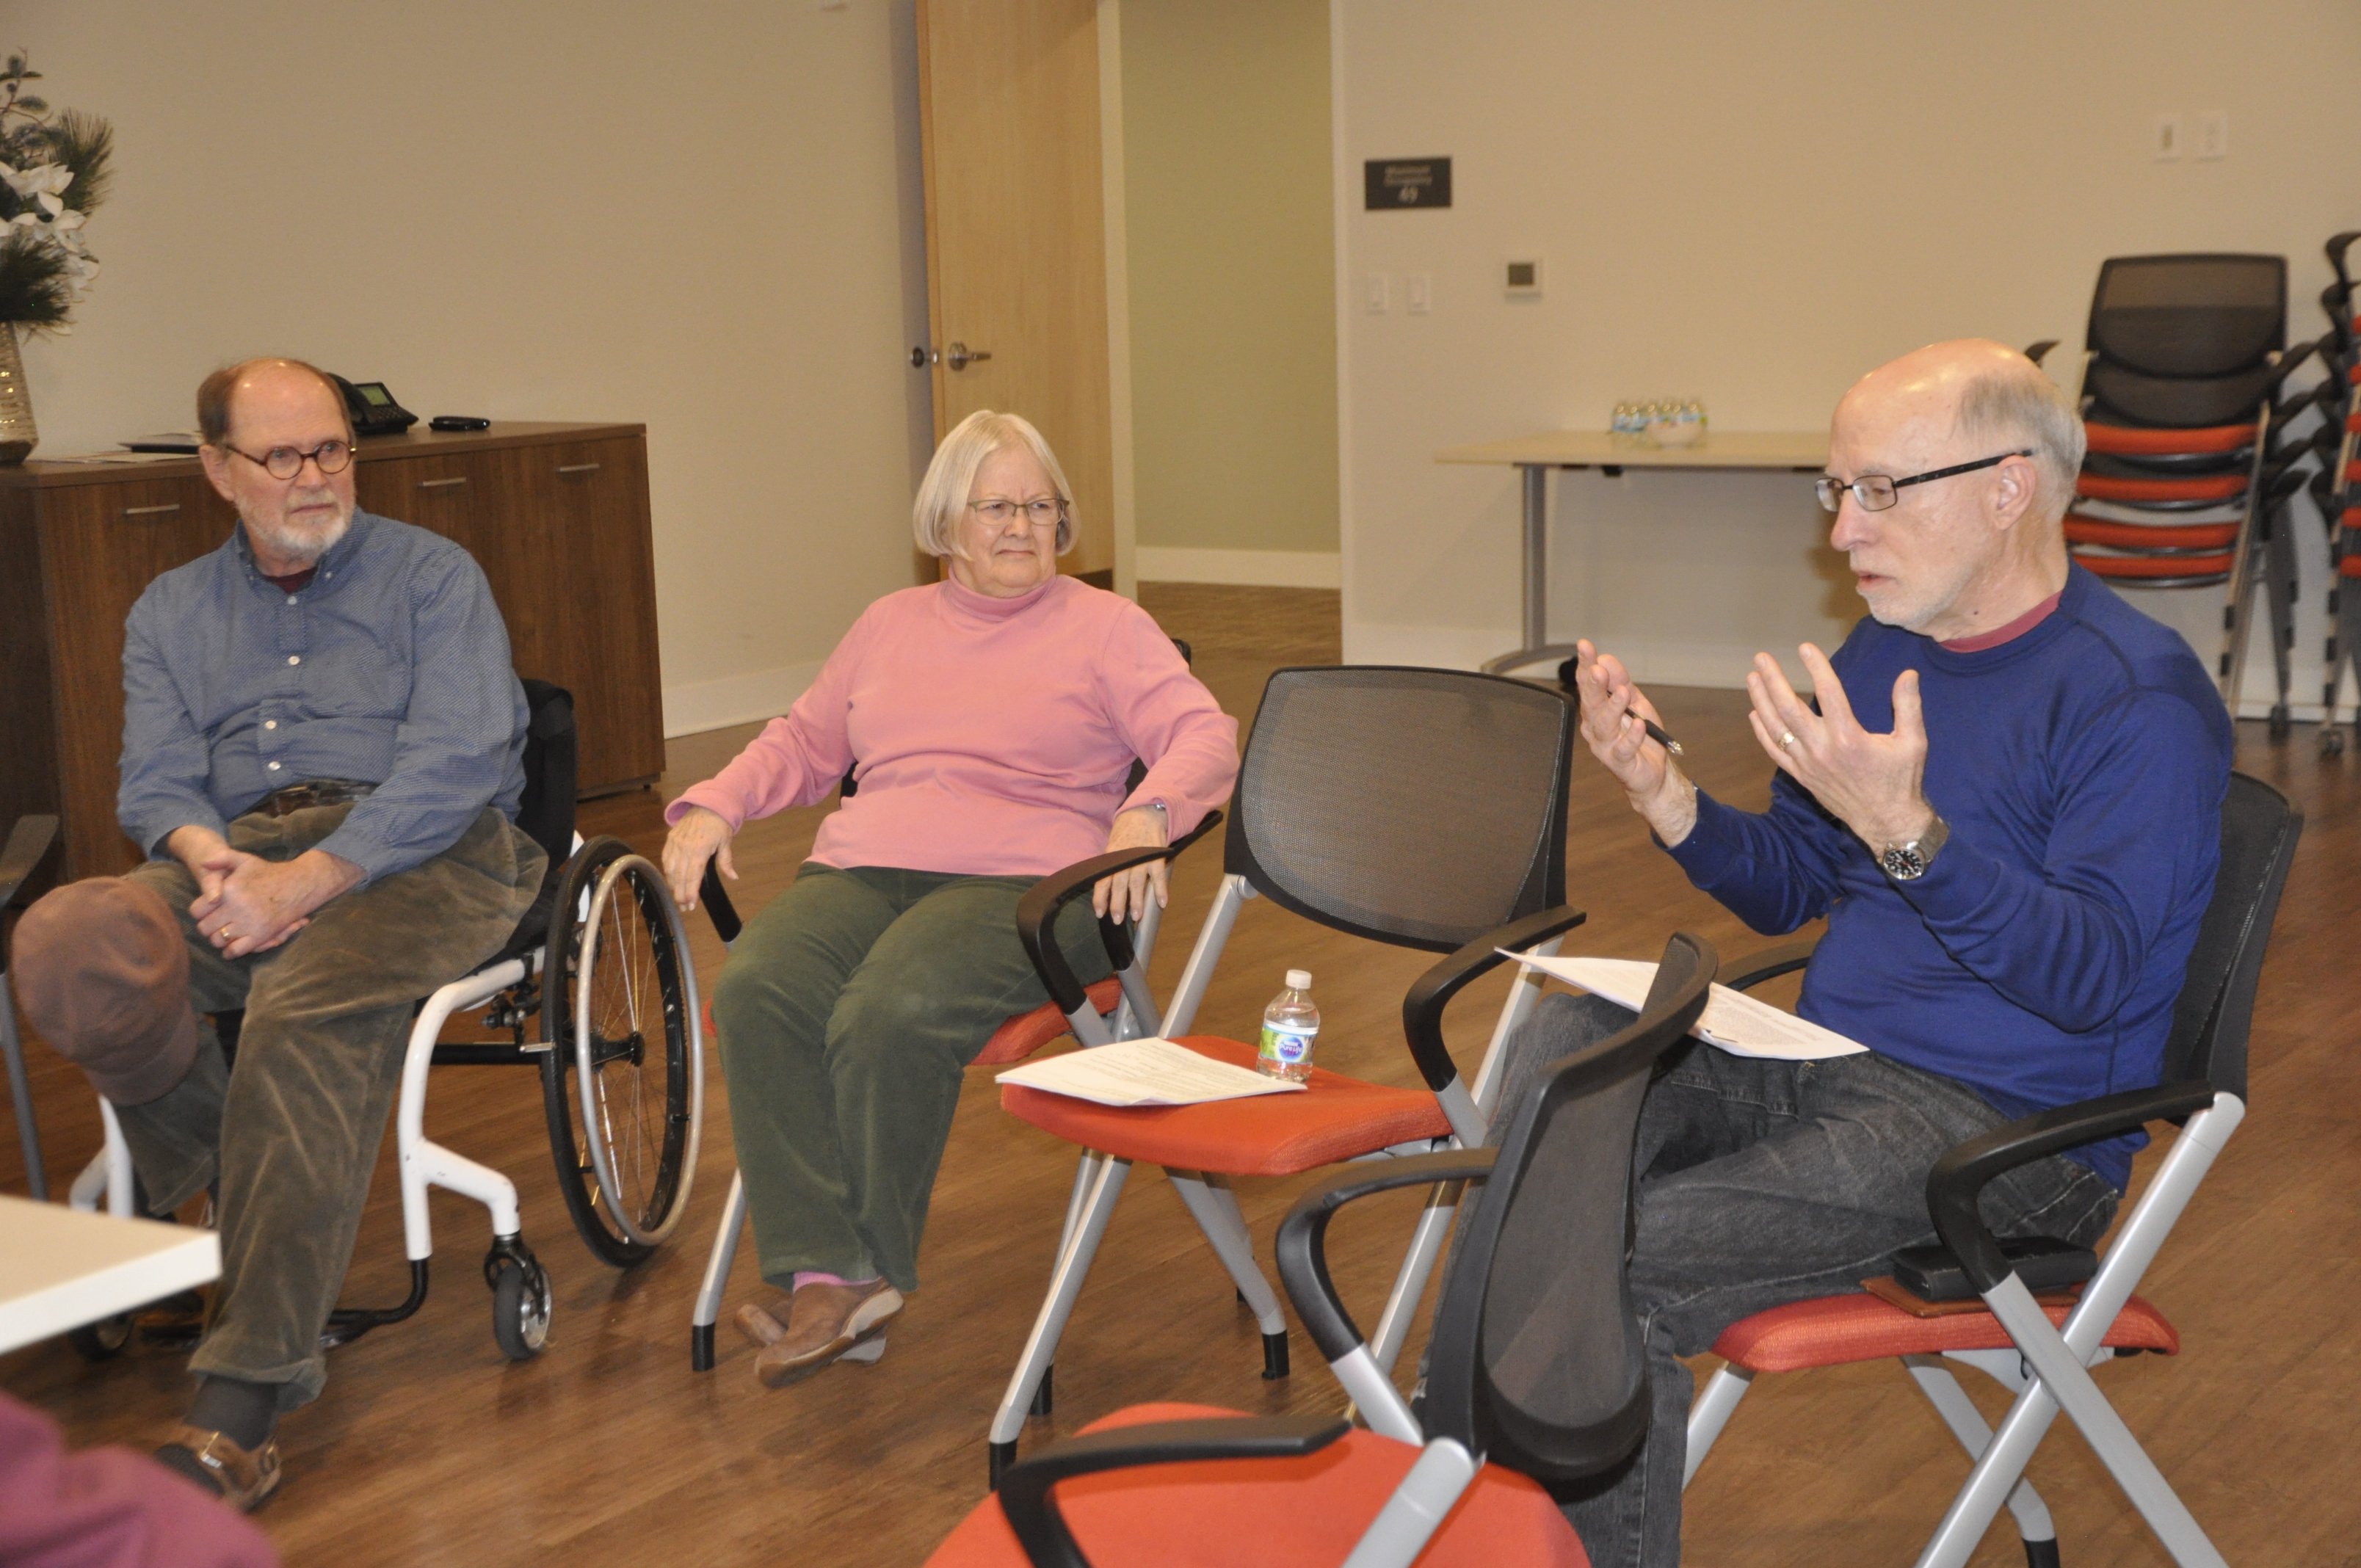 Students discuss scientific papers with residents of Abitan